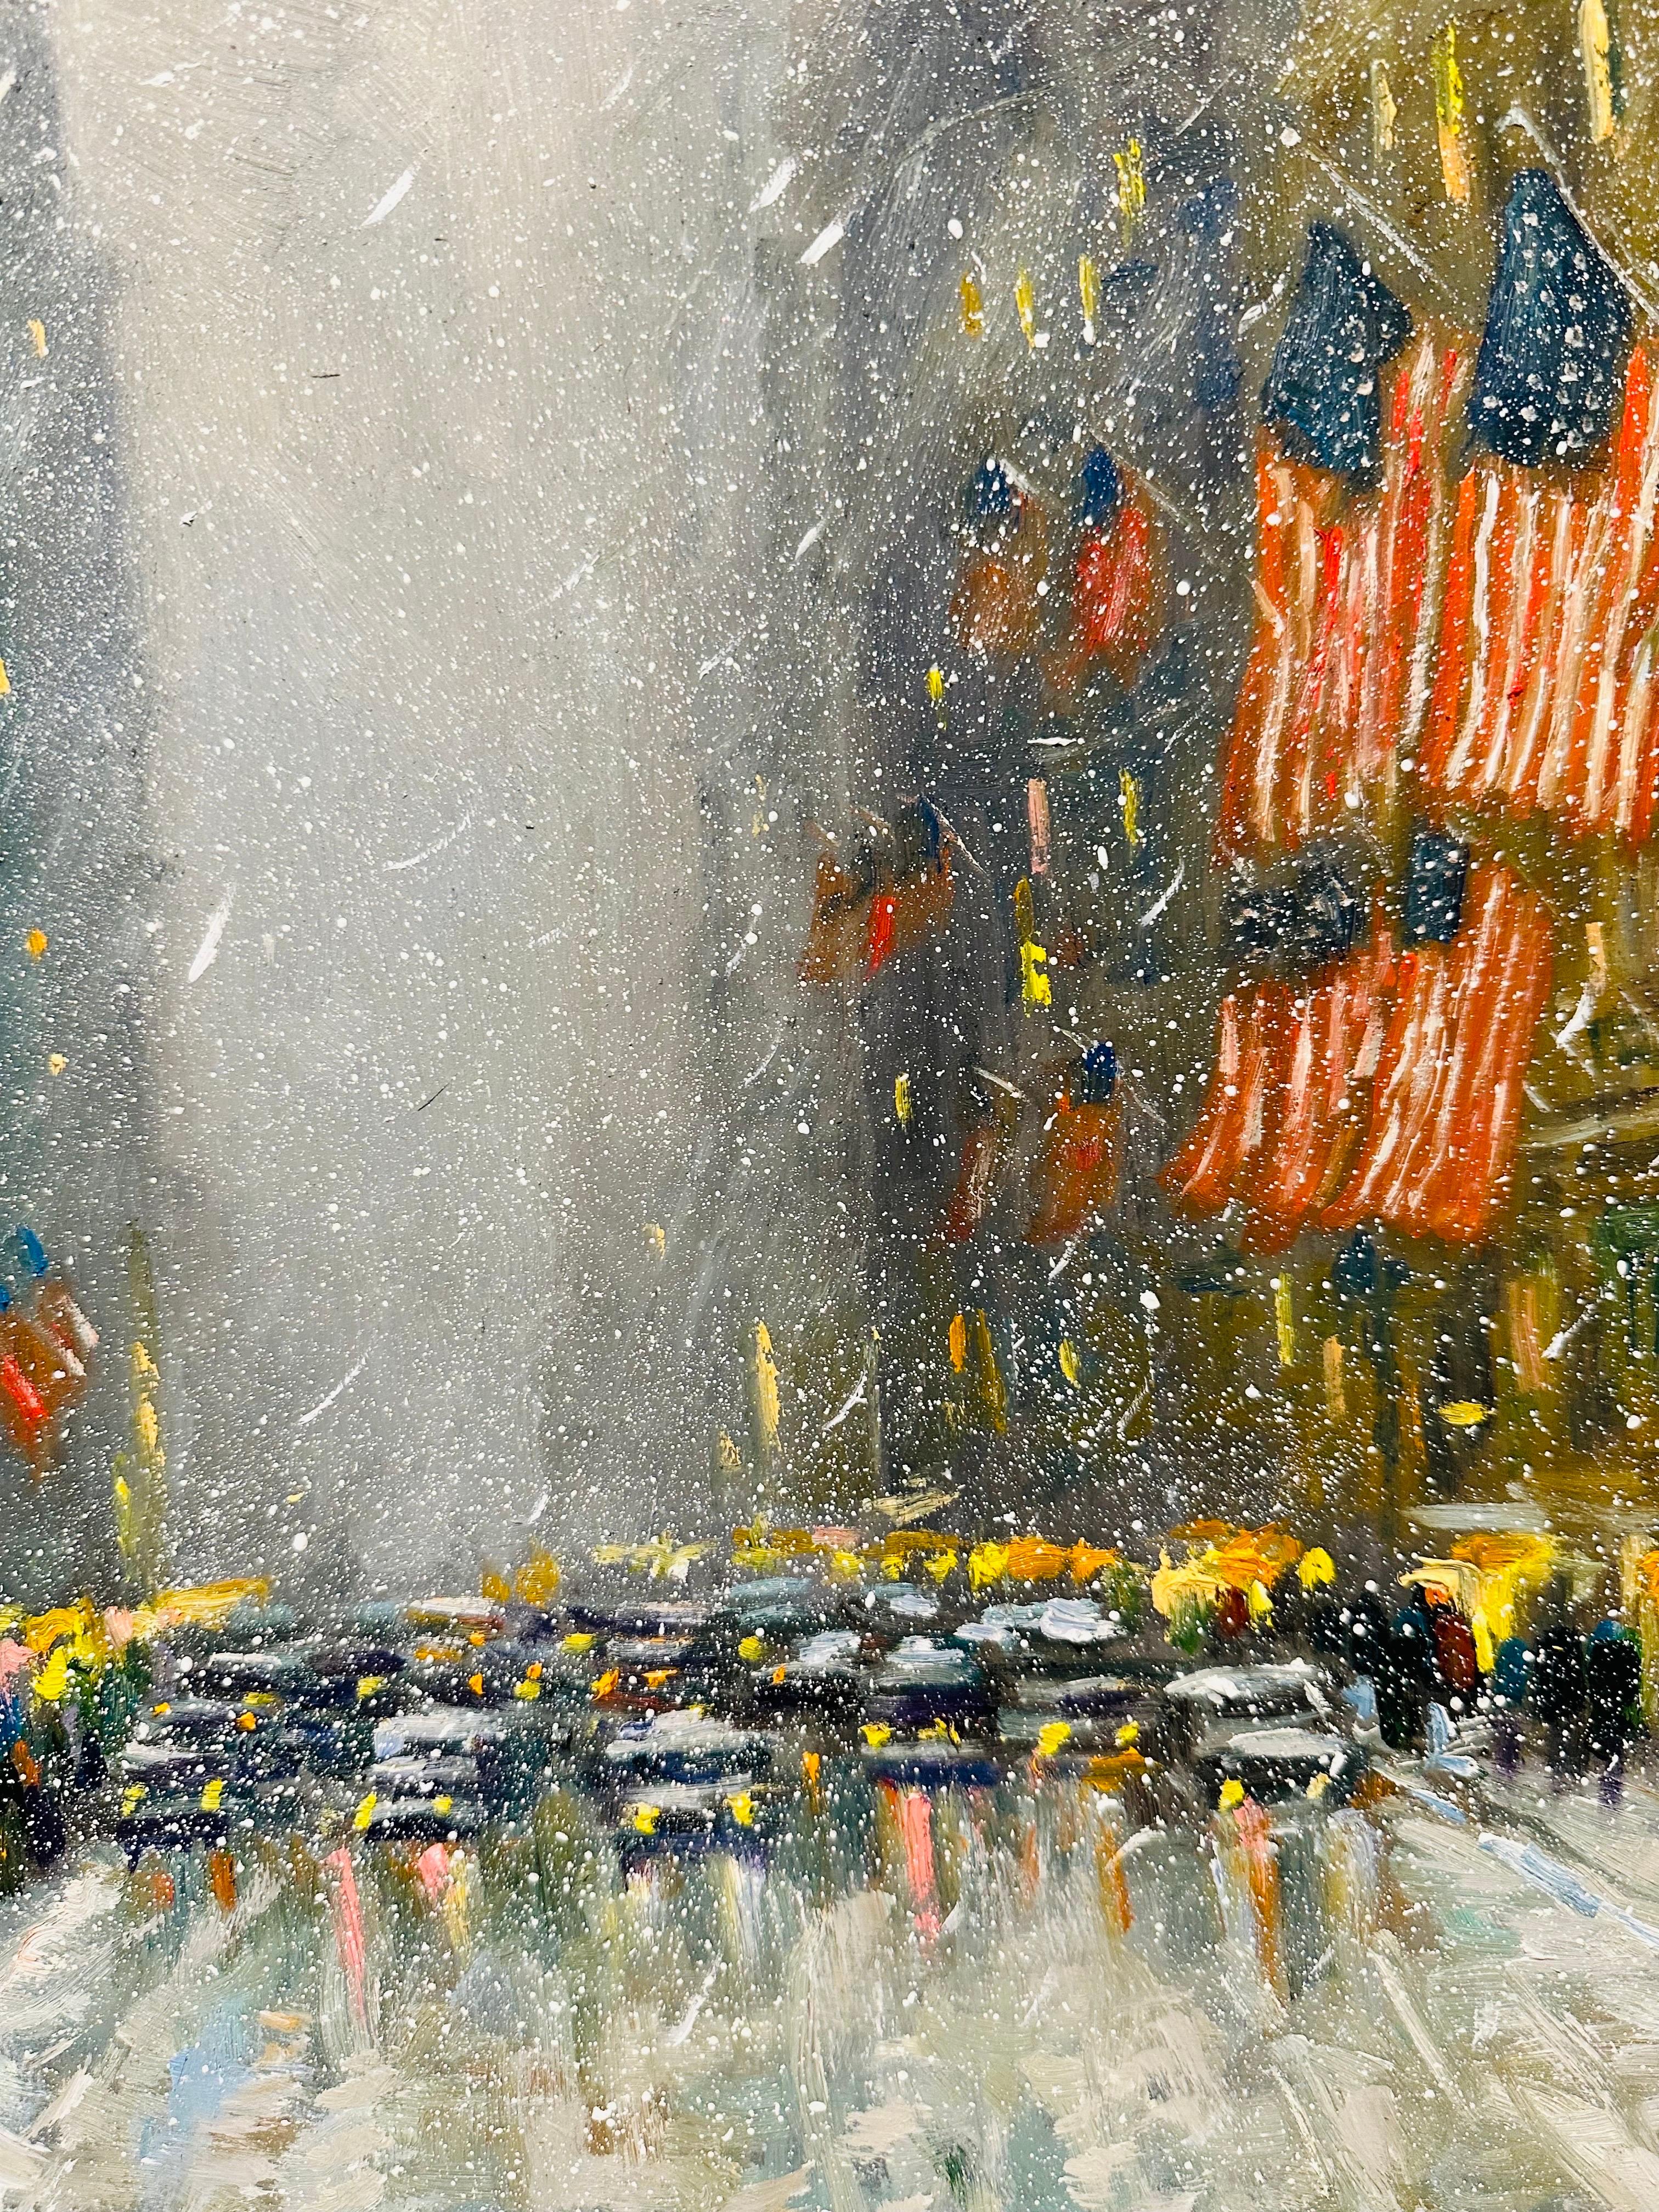 Impressionist New York City traffic jam on a winter day. Cars fill the street and snow fills the air. The city that never sleeps gleaming with patriotic pride. From early childhood to the present, Willett, a natural talent carried on the tradition